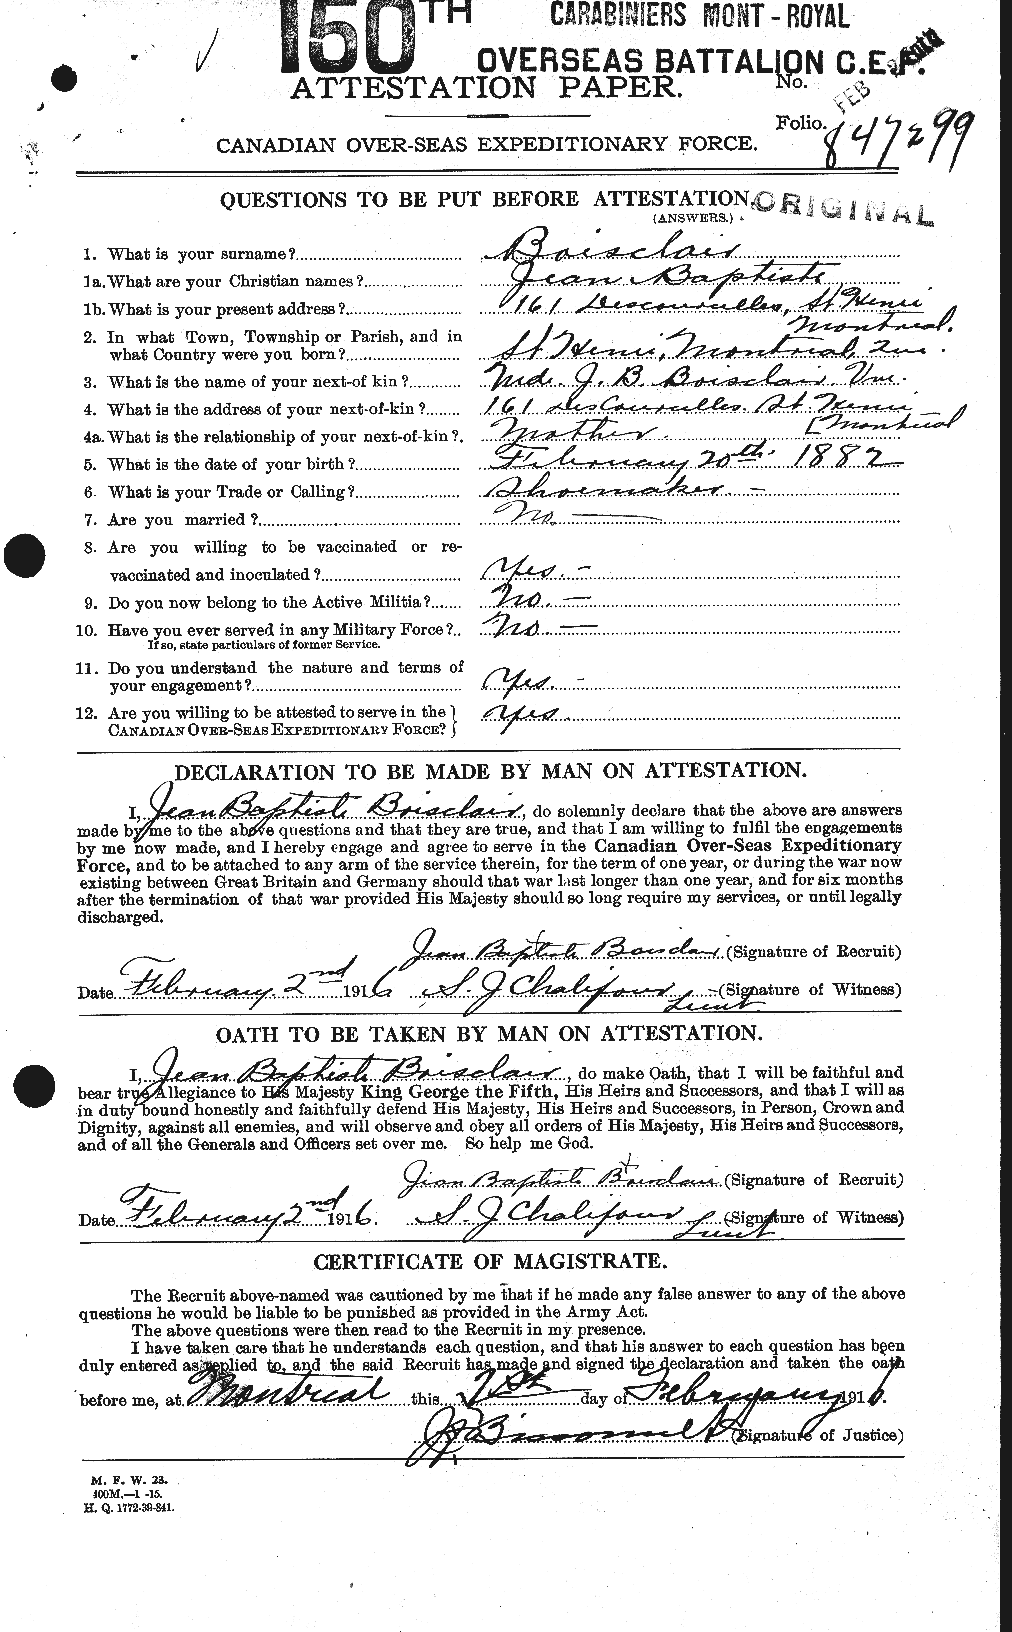 Personnel Records of the First World War - CEF 249393a